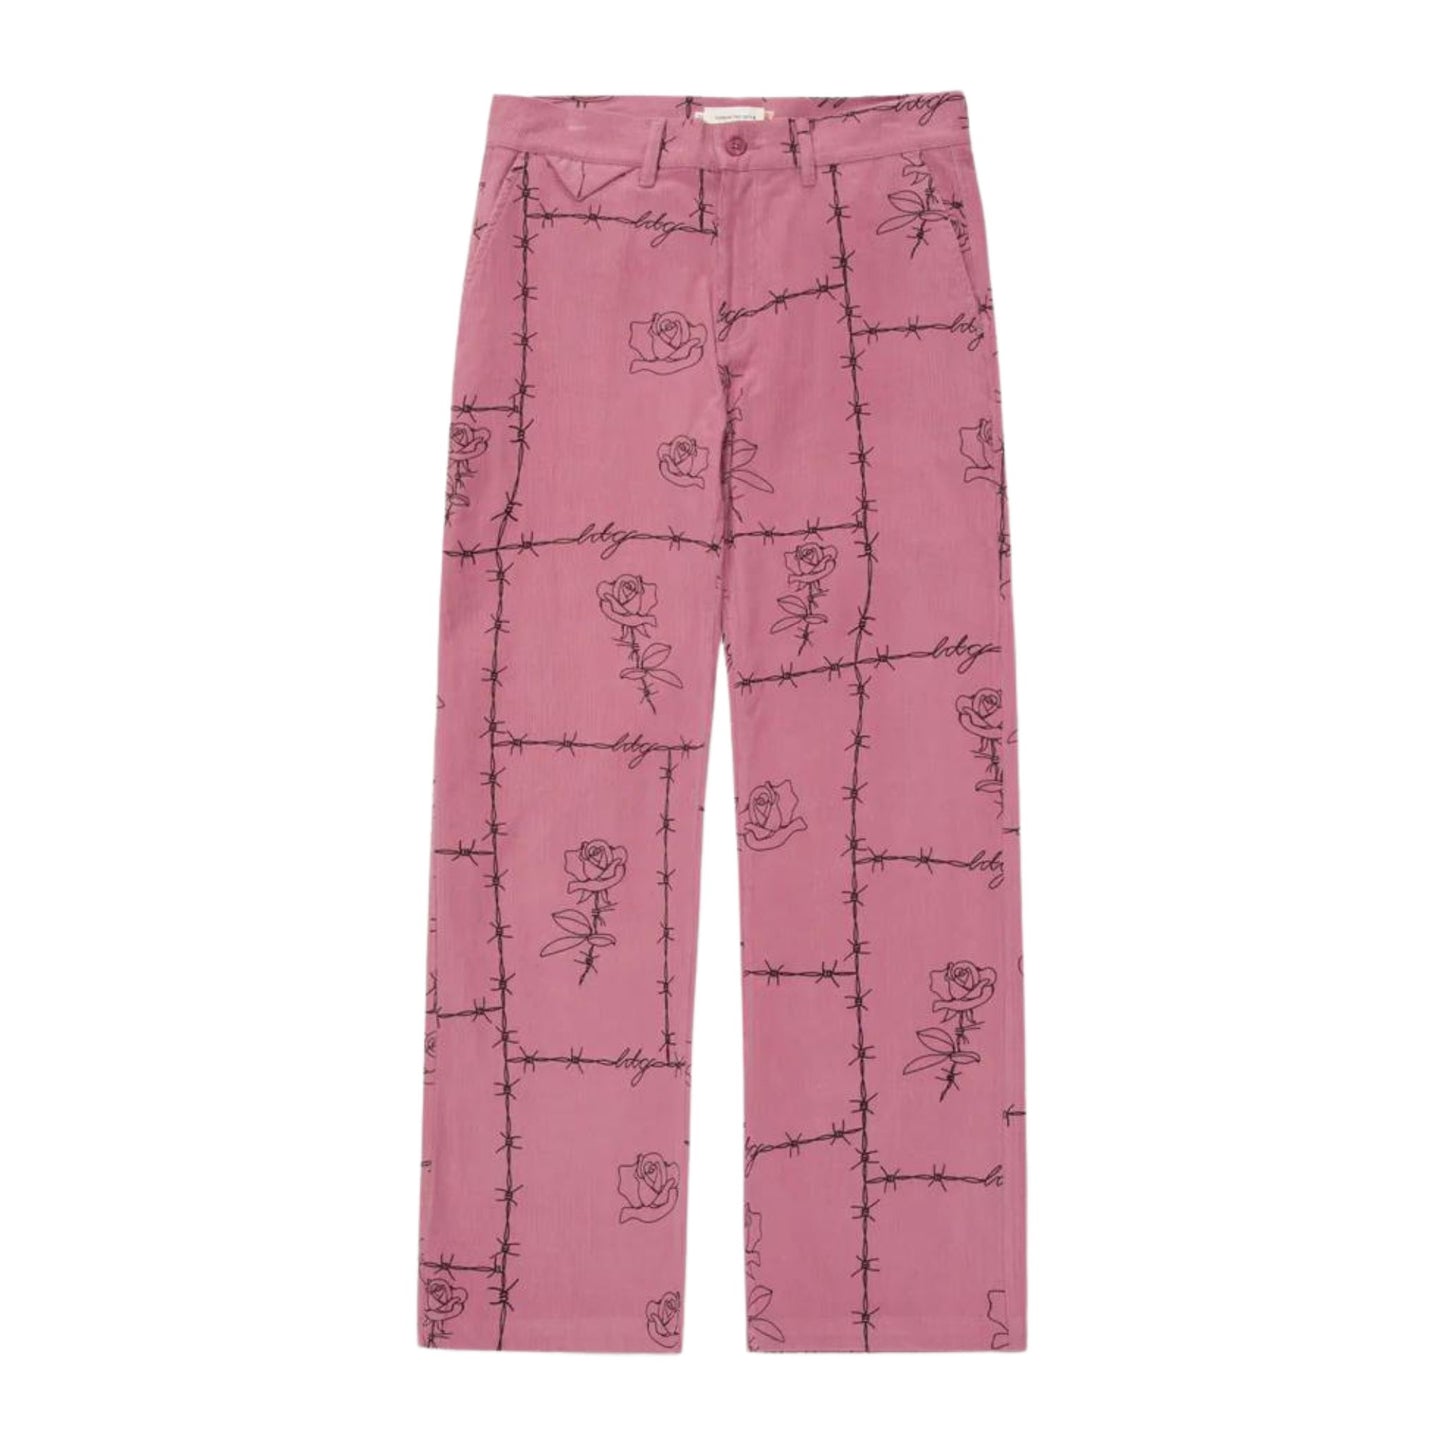 HONOR THE GIFT CREASE PANT